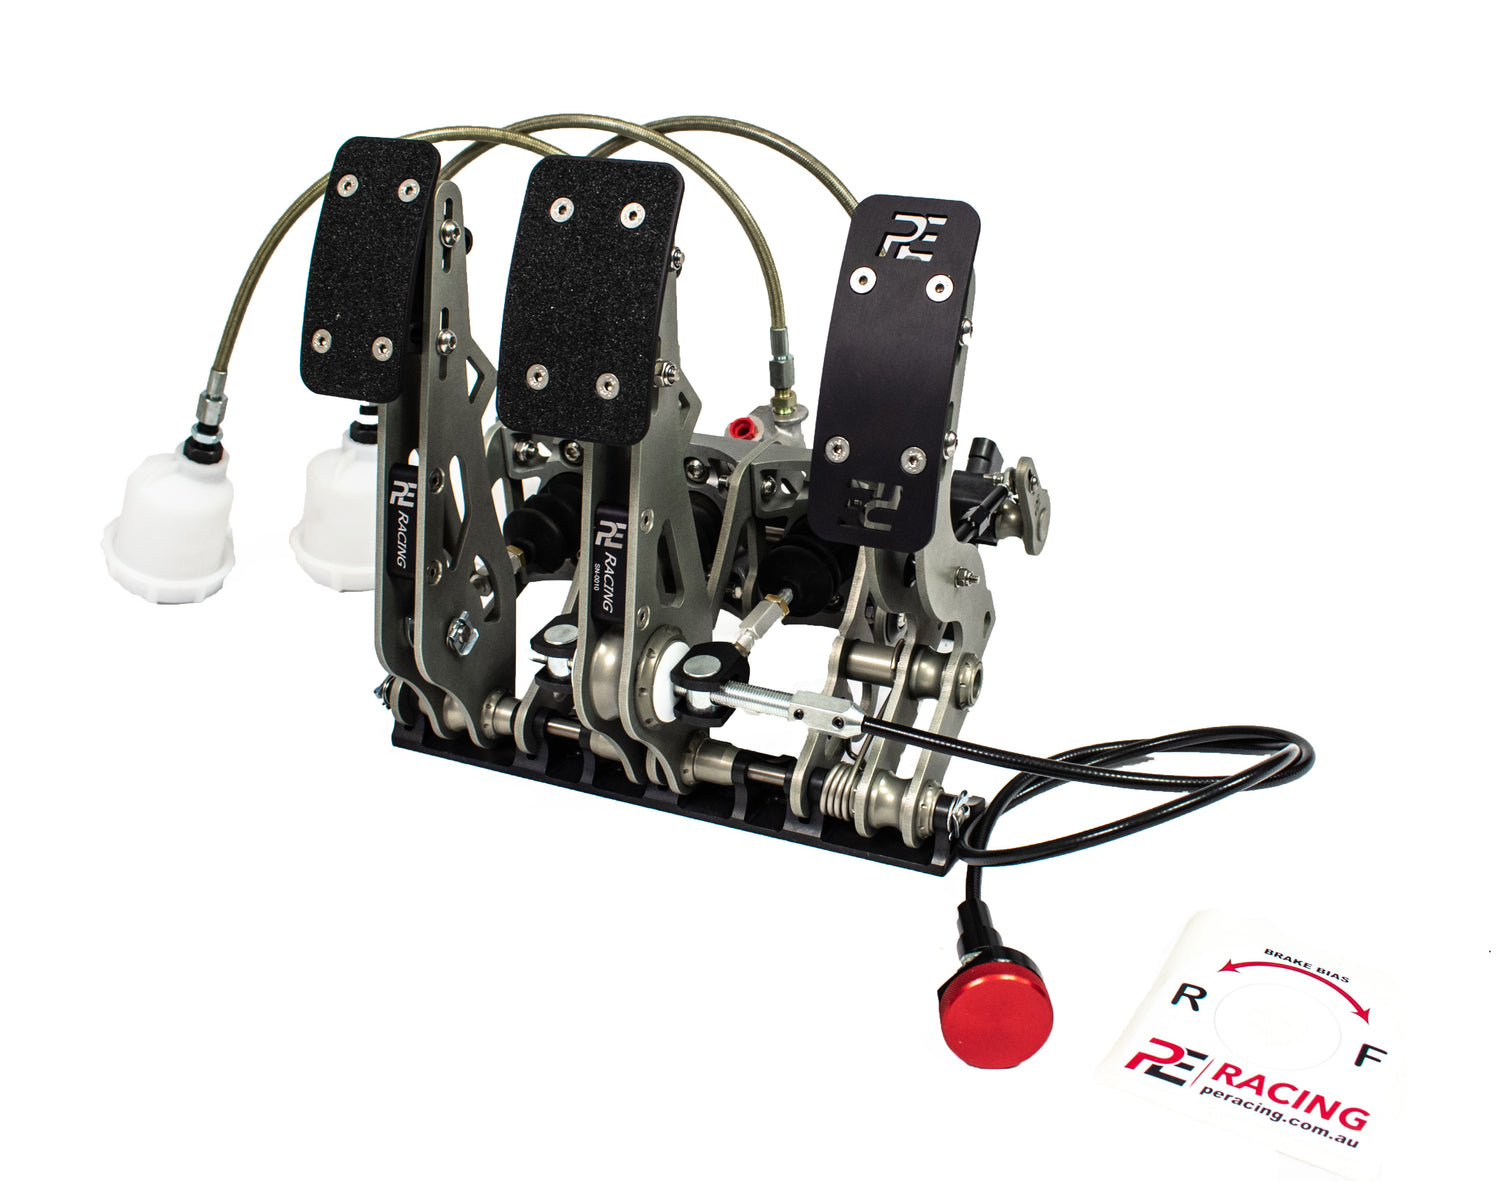 PE Racing Motorsport Products & Services High - end racing pedal assemblies